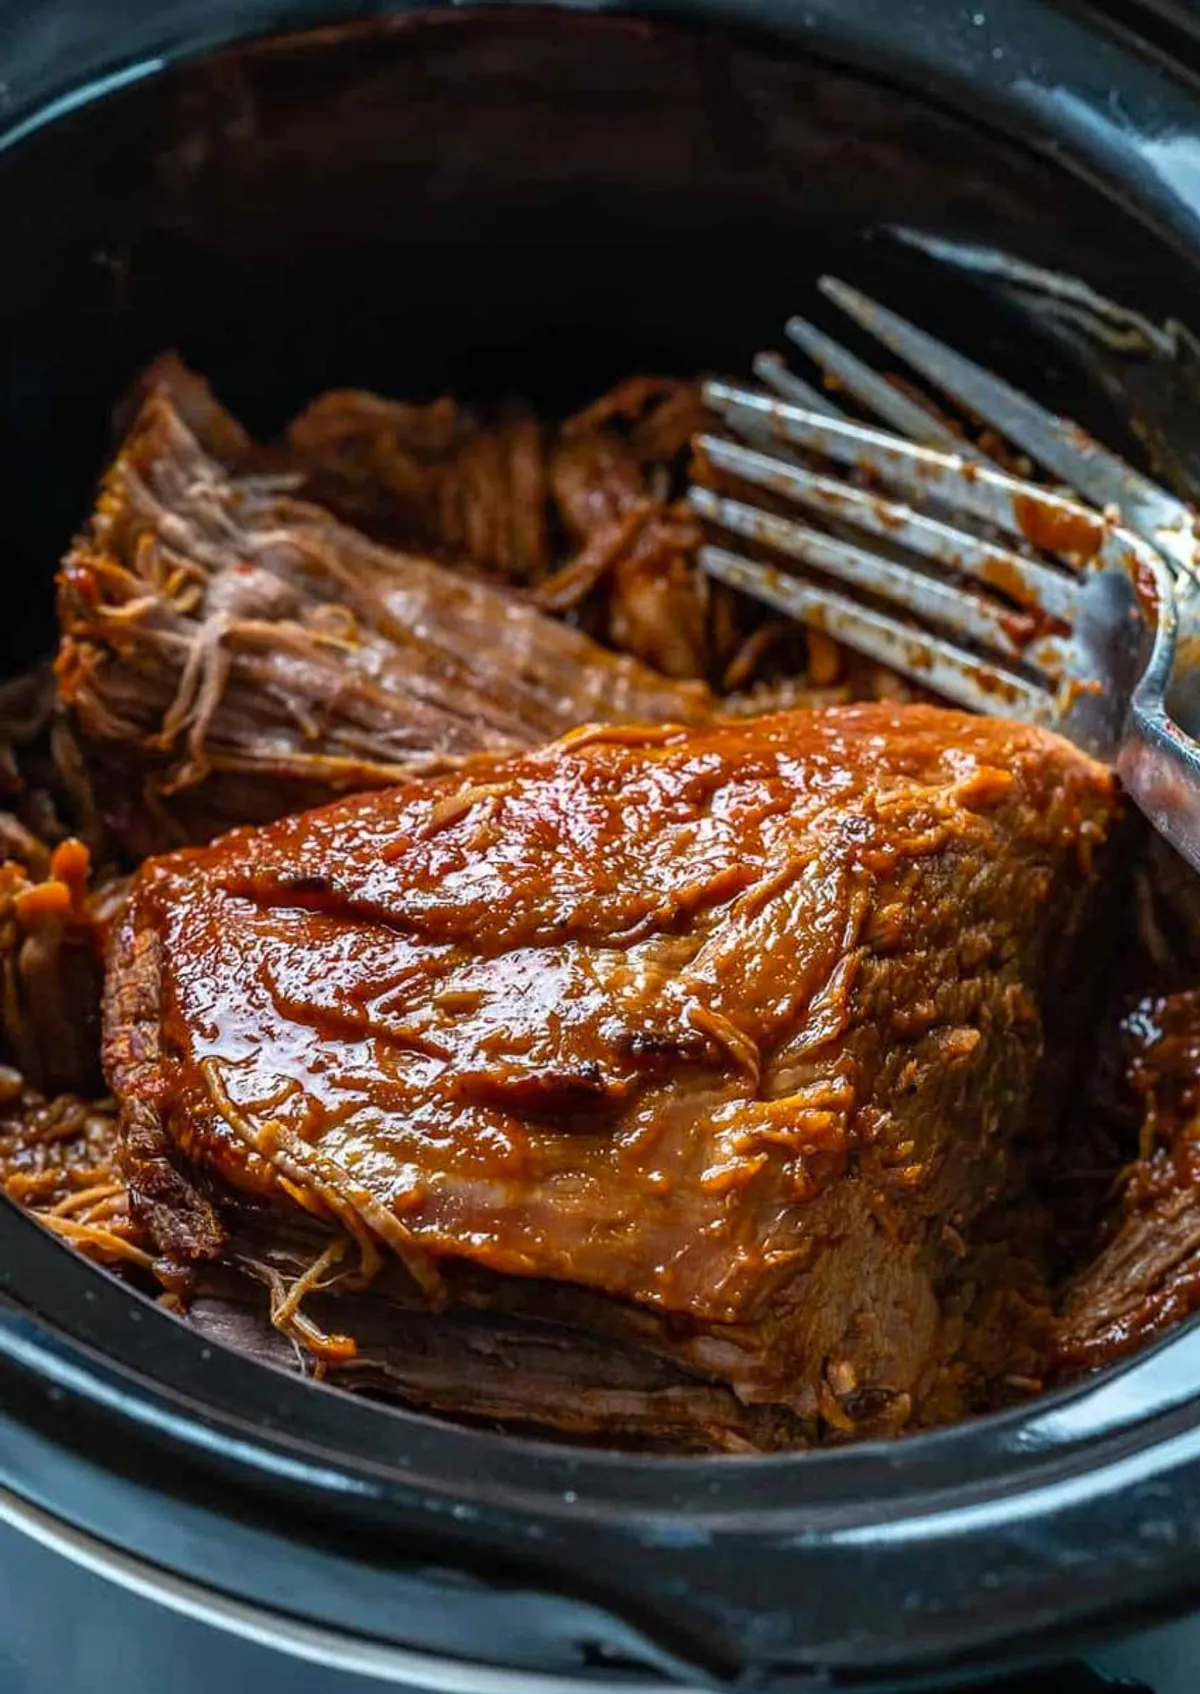 Slow cooked brisket is extremely tender